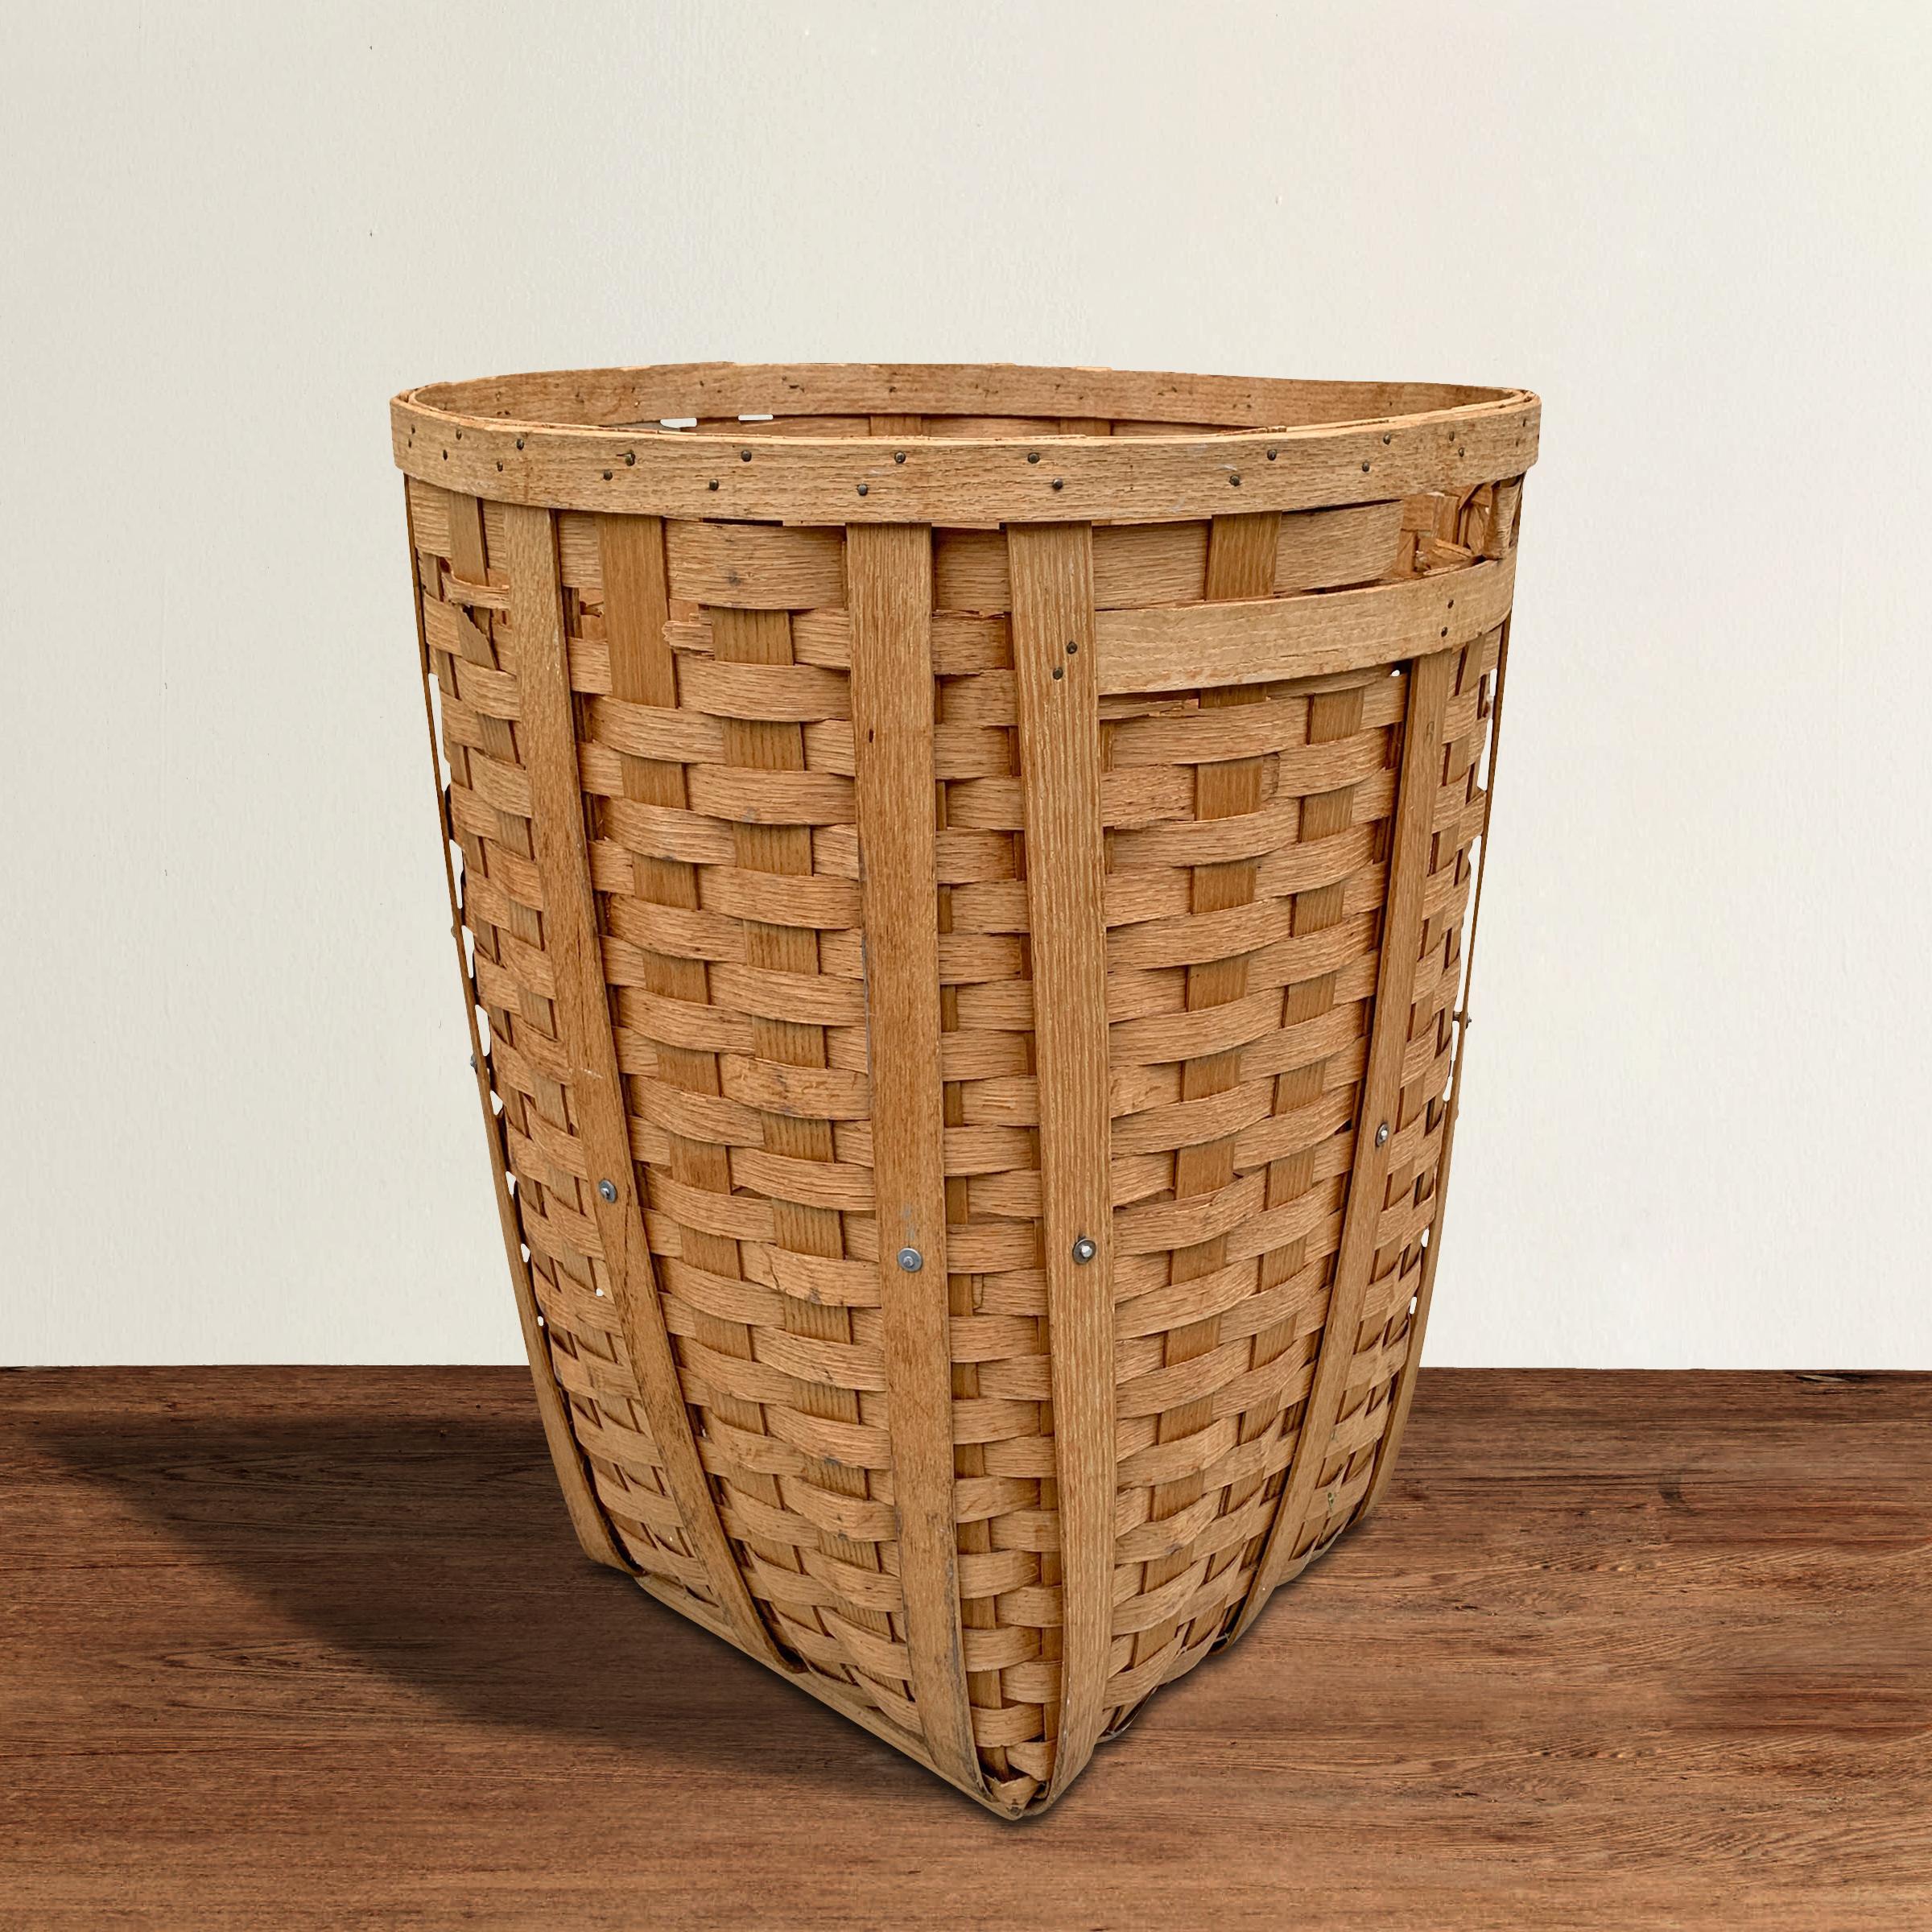 A fantastic massive and tall American woven oak splint basket with a handle on each side, and wooden supports along the bottom. Perfect for storing pillows, blankets, toys, or if you're that person, your dog’s toys.